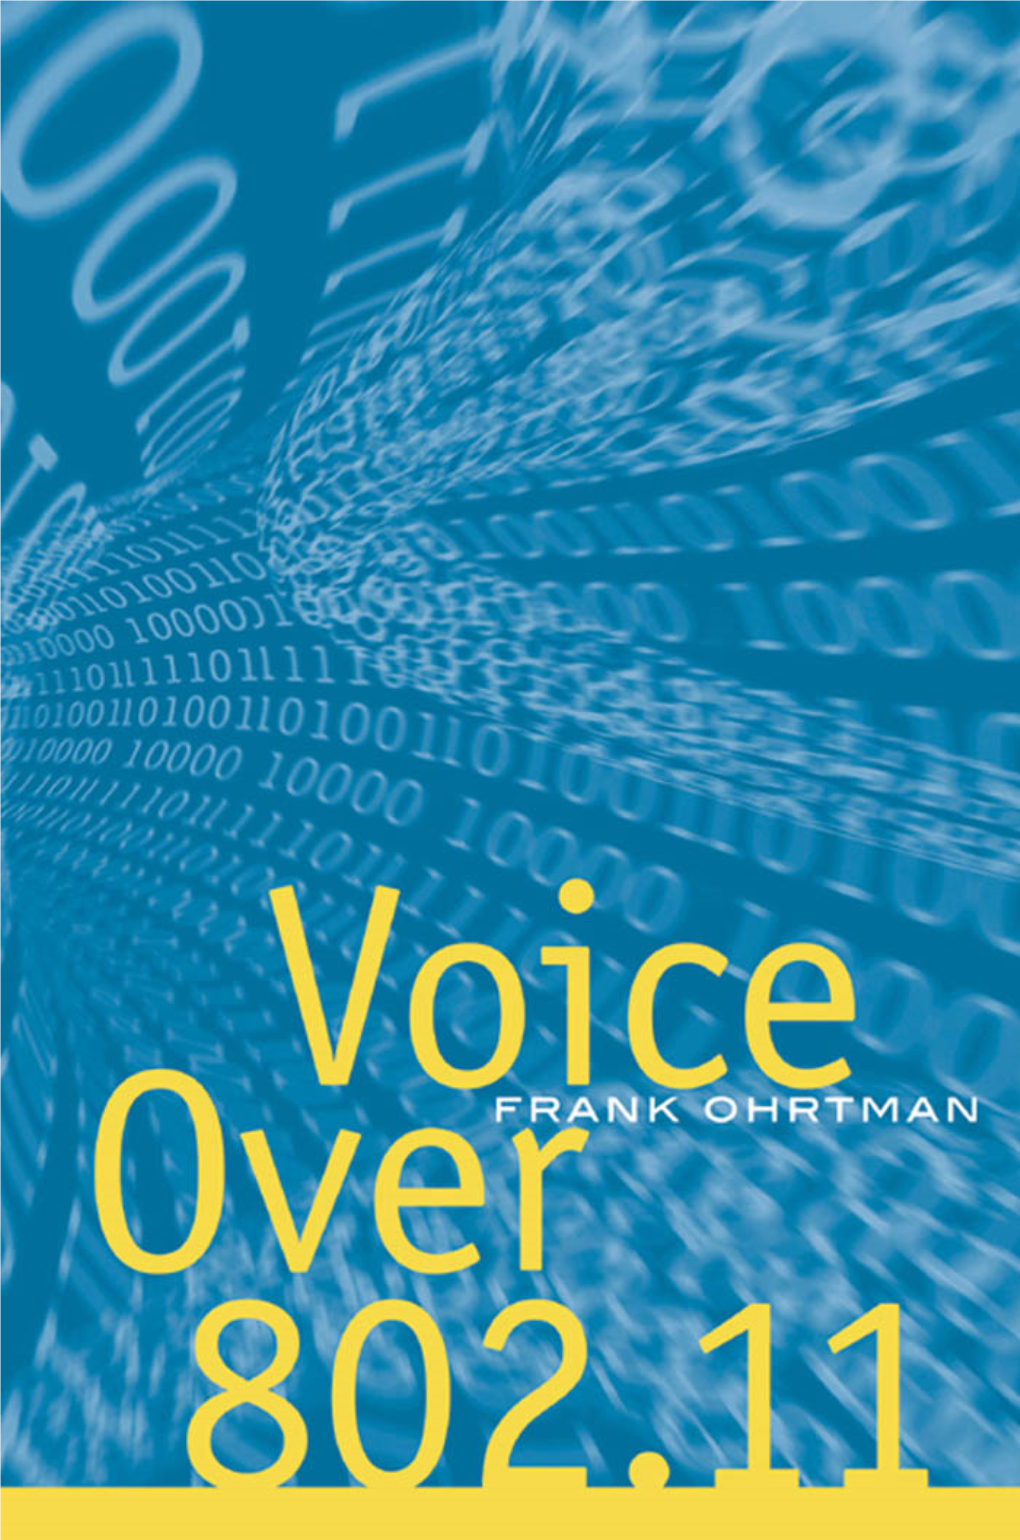 Voice Over 802.11 for a Listing of Recent Titles in the Artech House Telecommunications Library, Turn to the Back of This Book